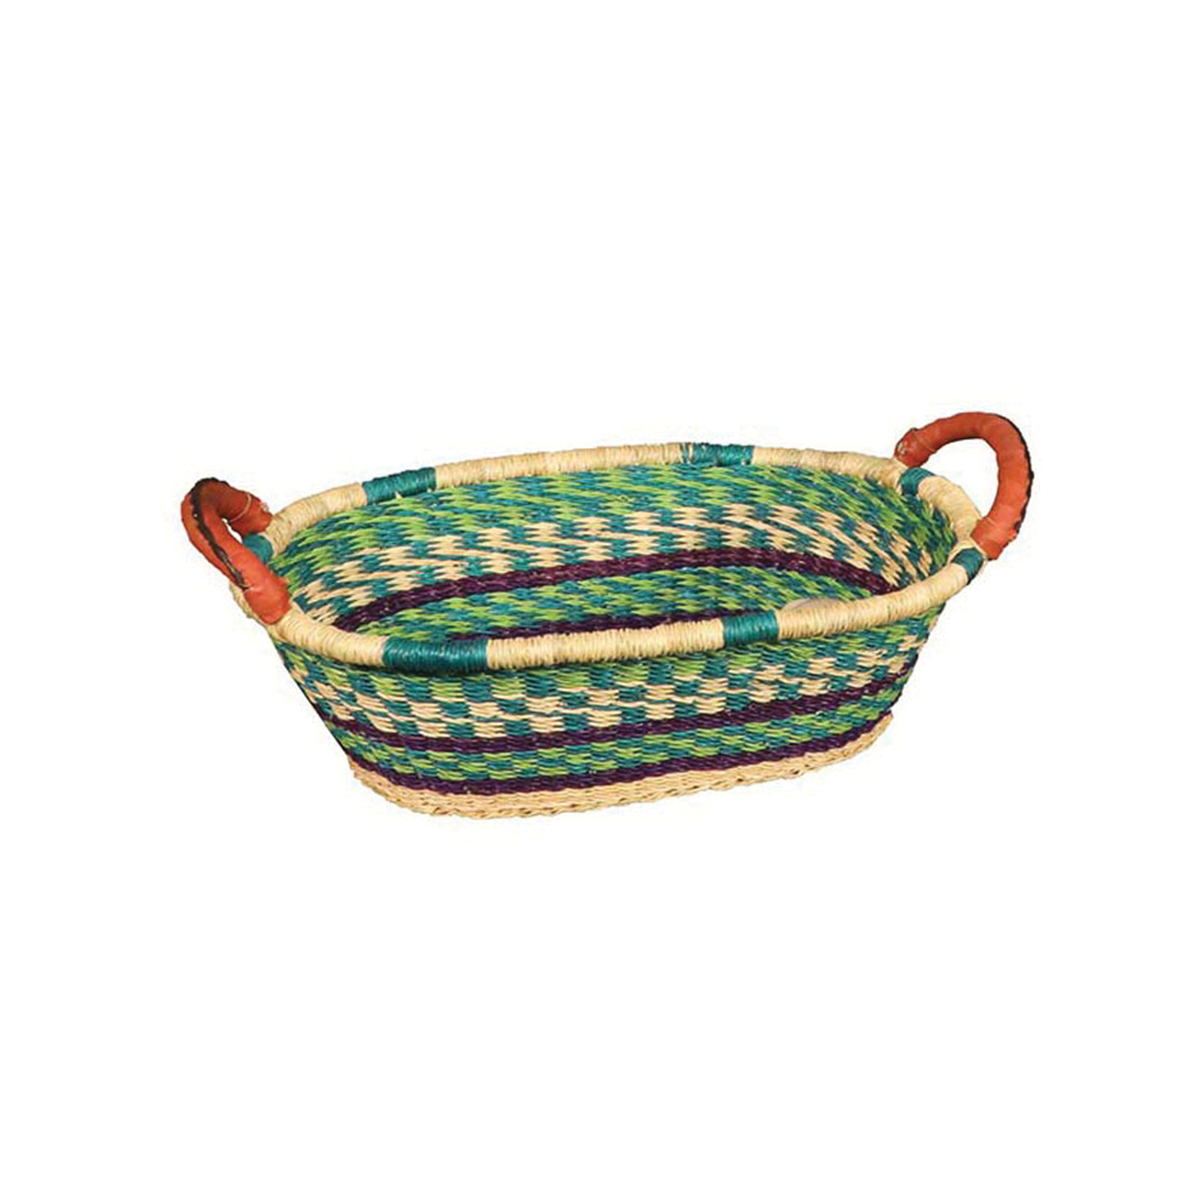 AFRICAN MARKET BASKET G-147A Bread Basket Tote, 16 to 17 in L, 10 to 11 in W - 2